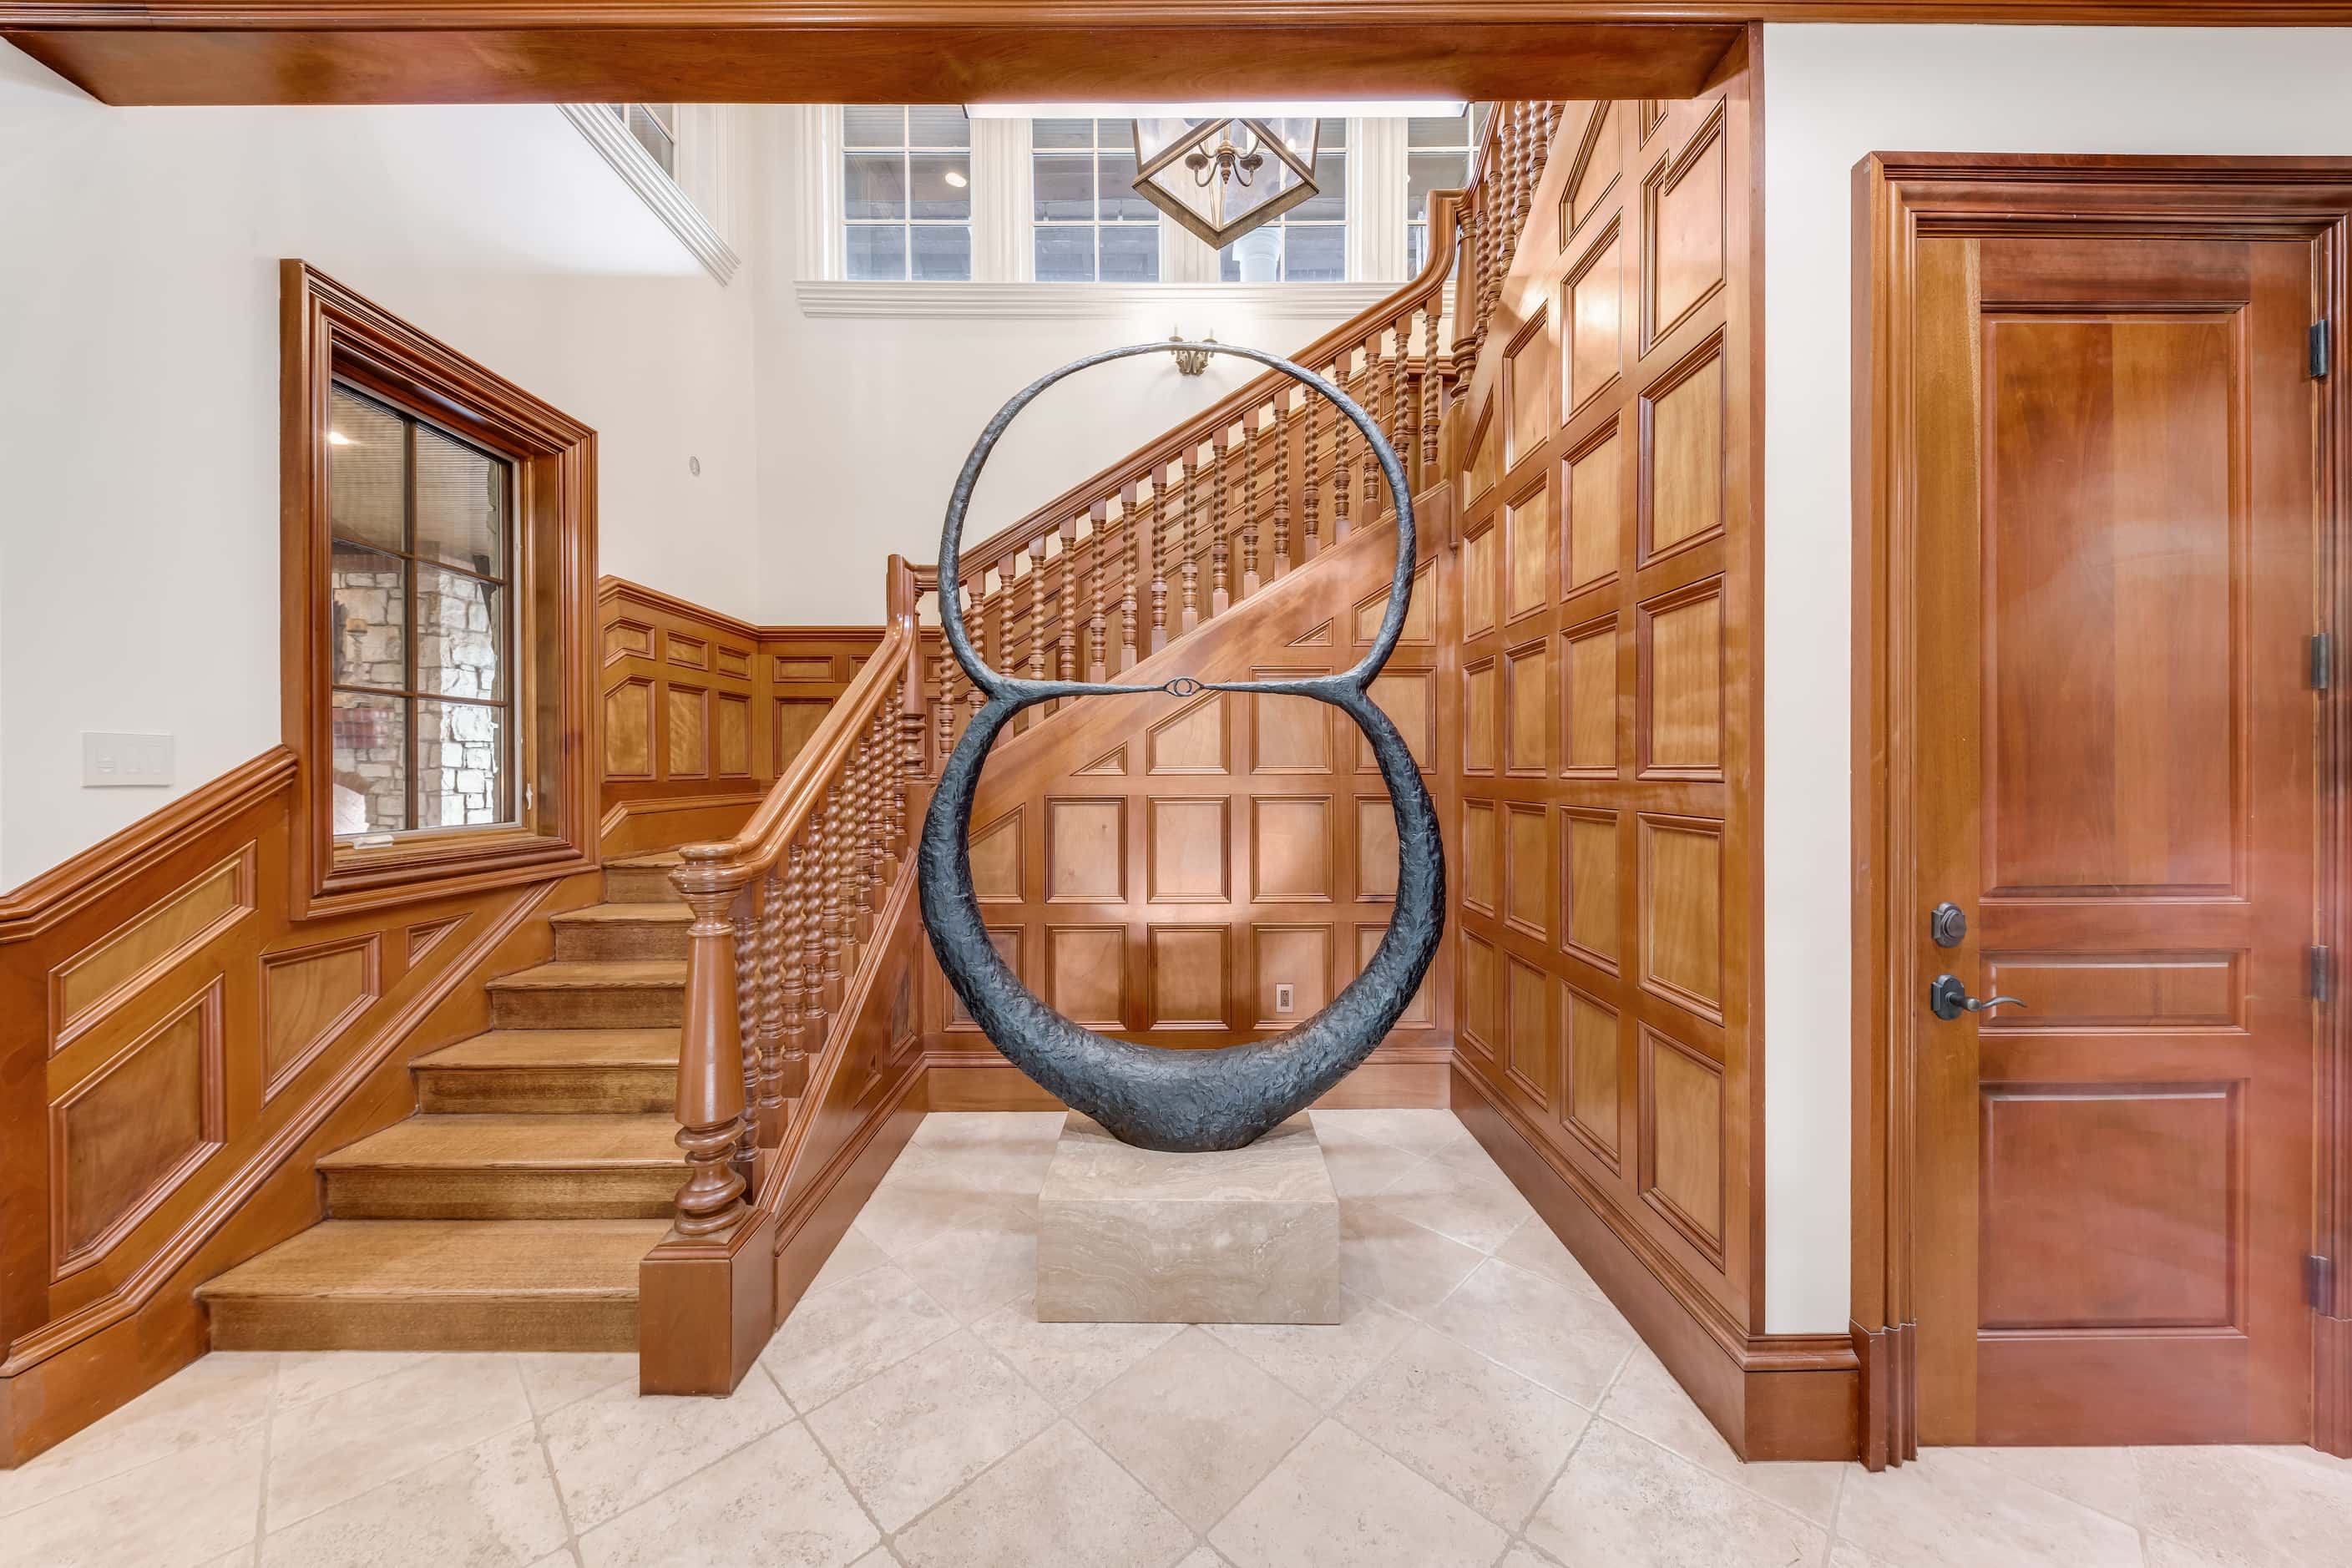 An English manor-style estate in Colleyville hit the market for $8.75 million.

The home...